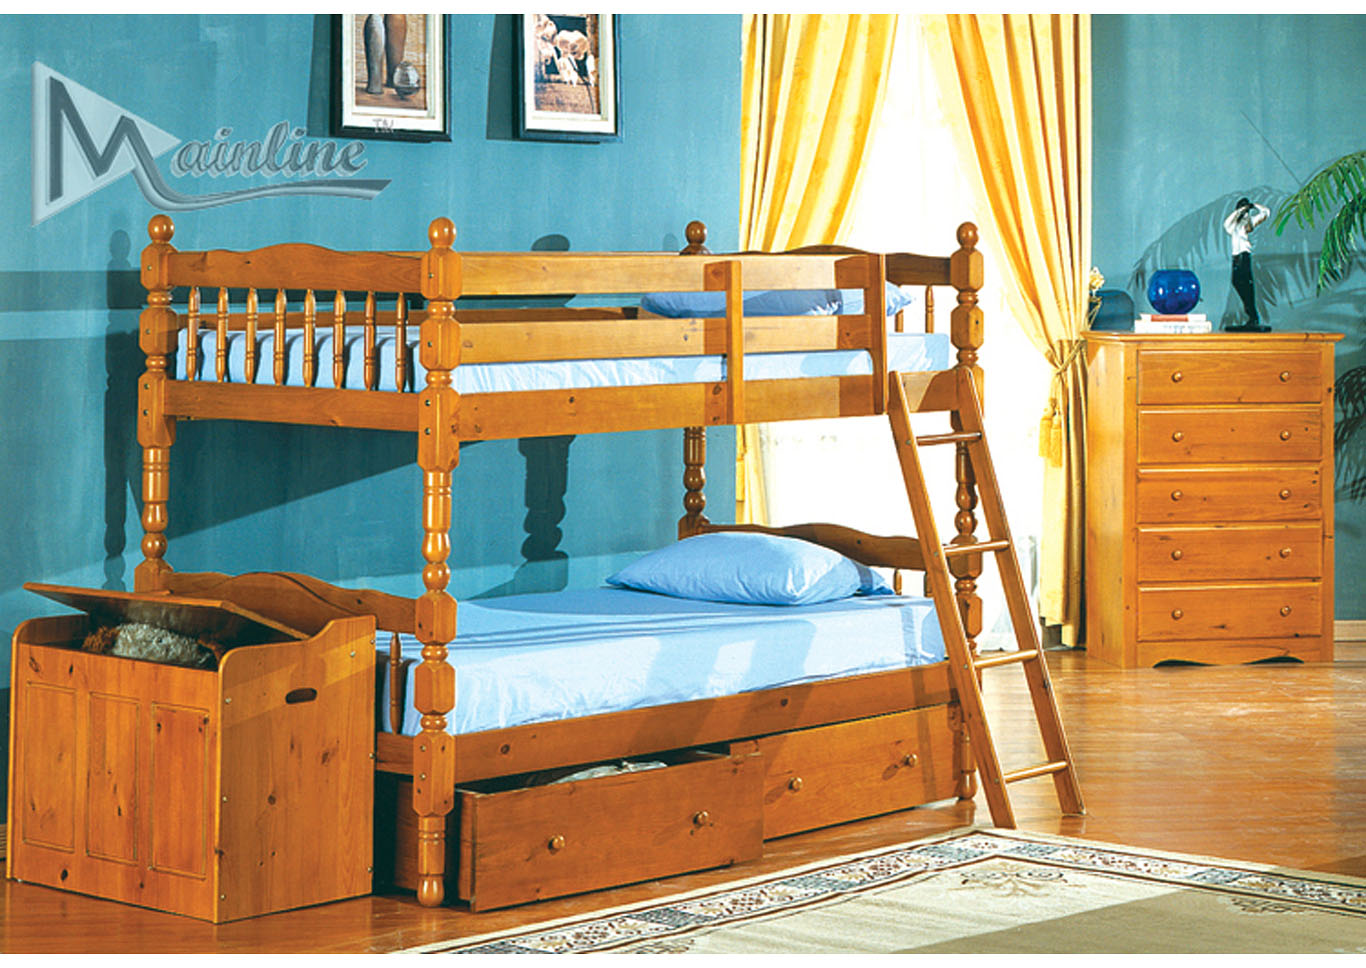 Pine T/Tw Spindle Bunk Bed,Mainline